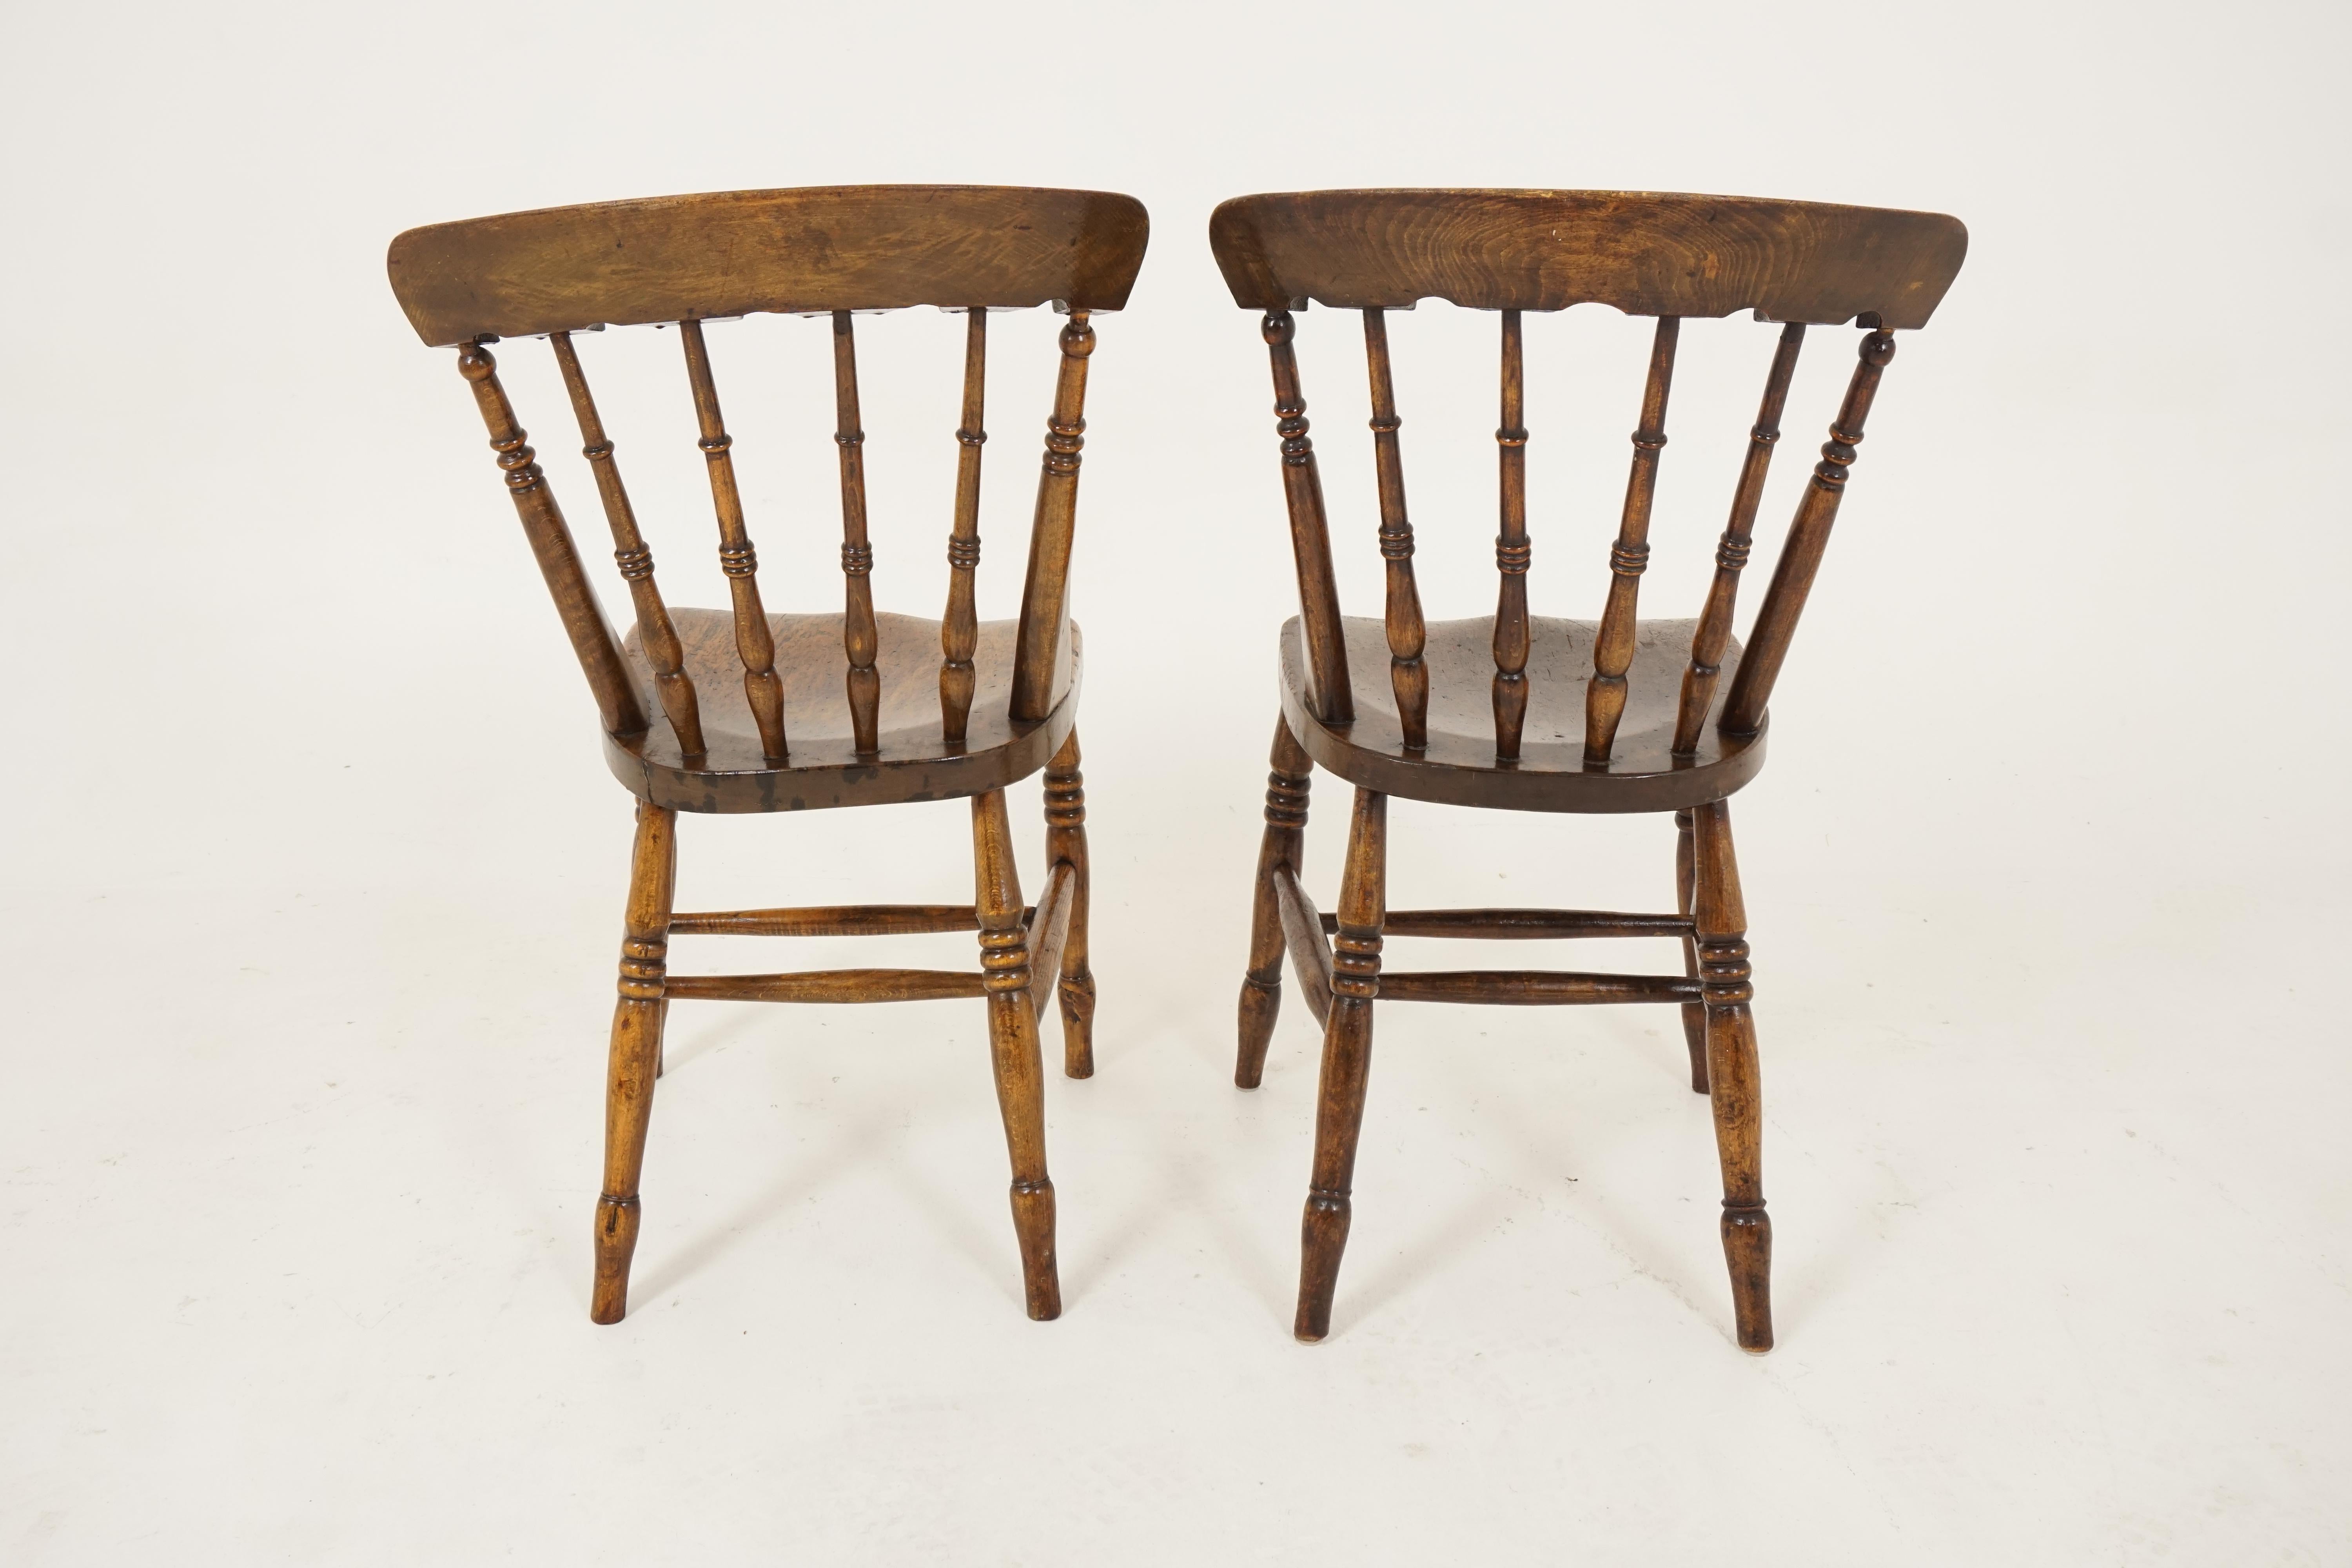 Hand-Crafted 4 Antique Chairs, Beechwood, Spindle Bar Back, Farmhouse Kitchen Chairs, B2524